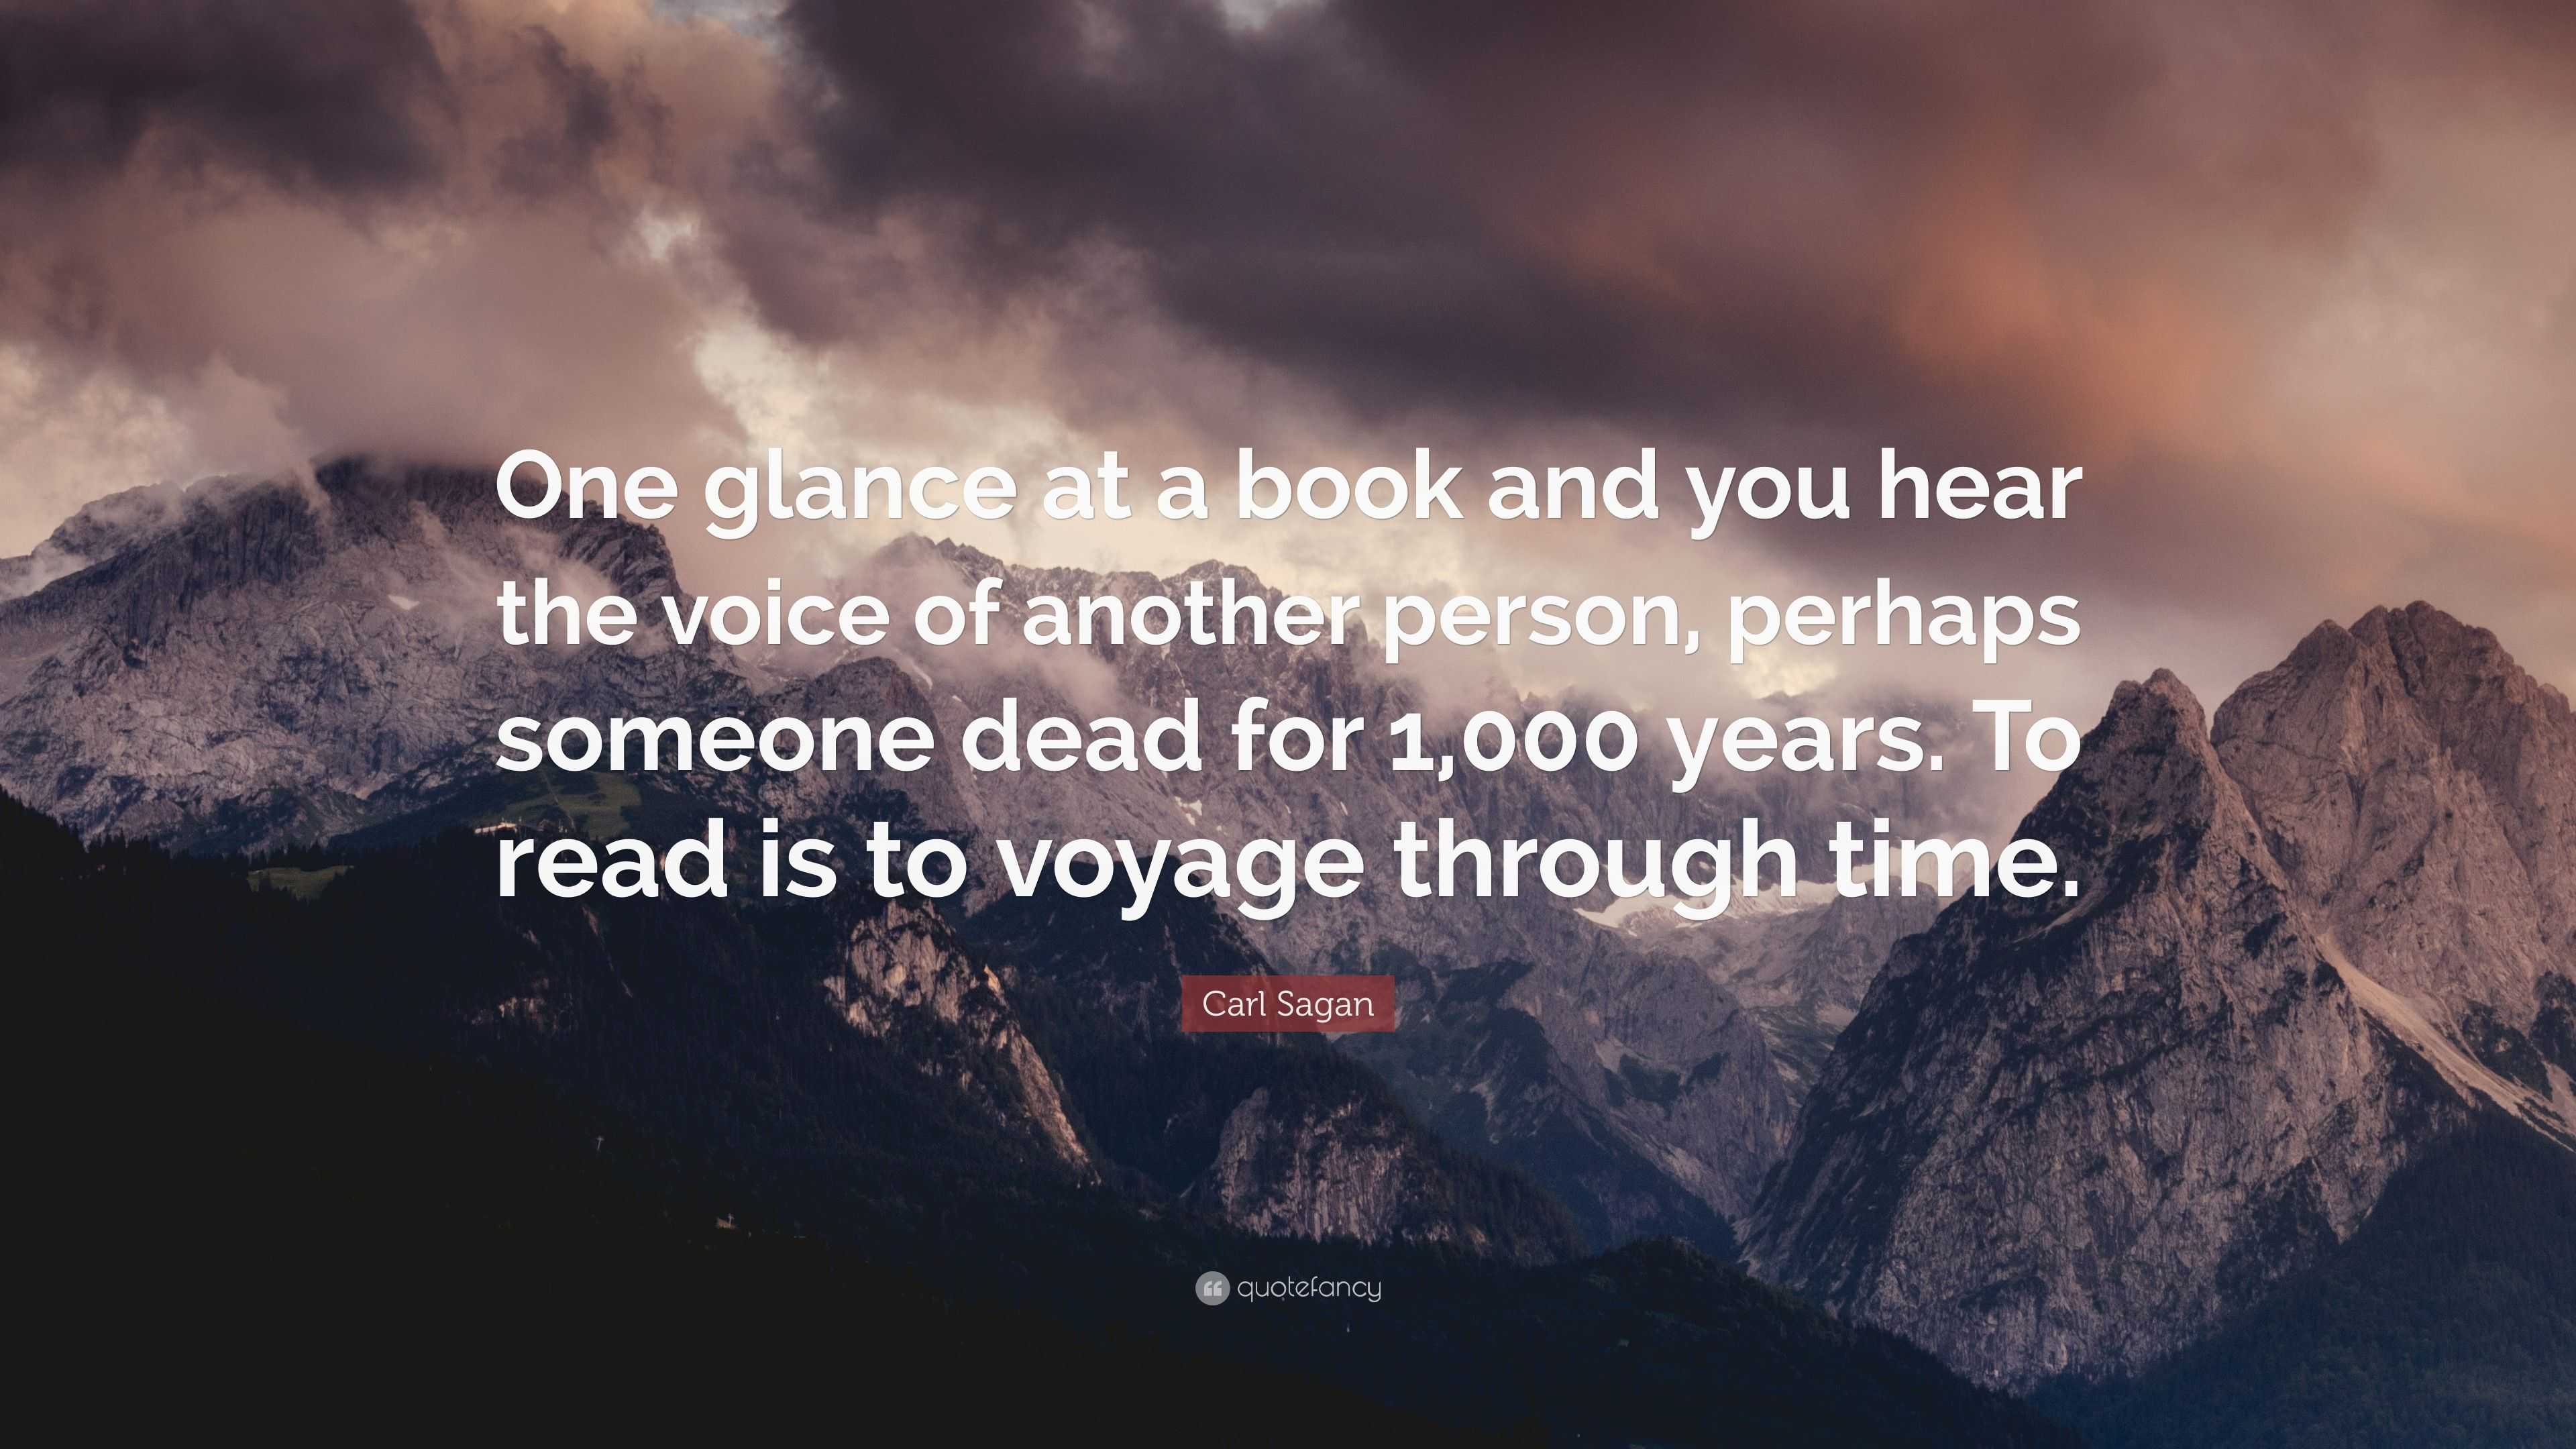 Carl Sagan Quote: “One glance at a book and you hear the voice of ...